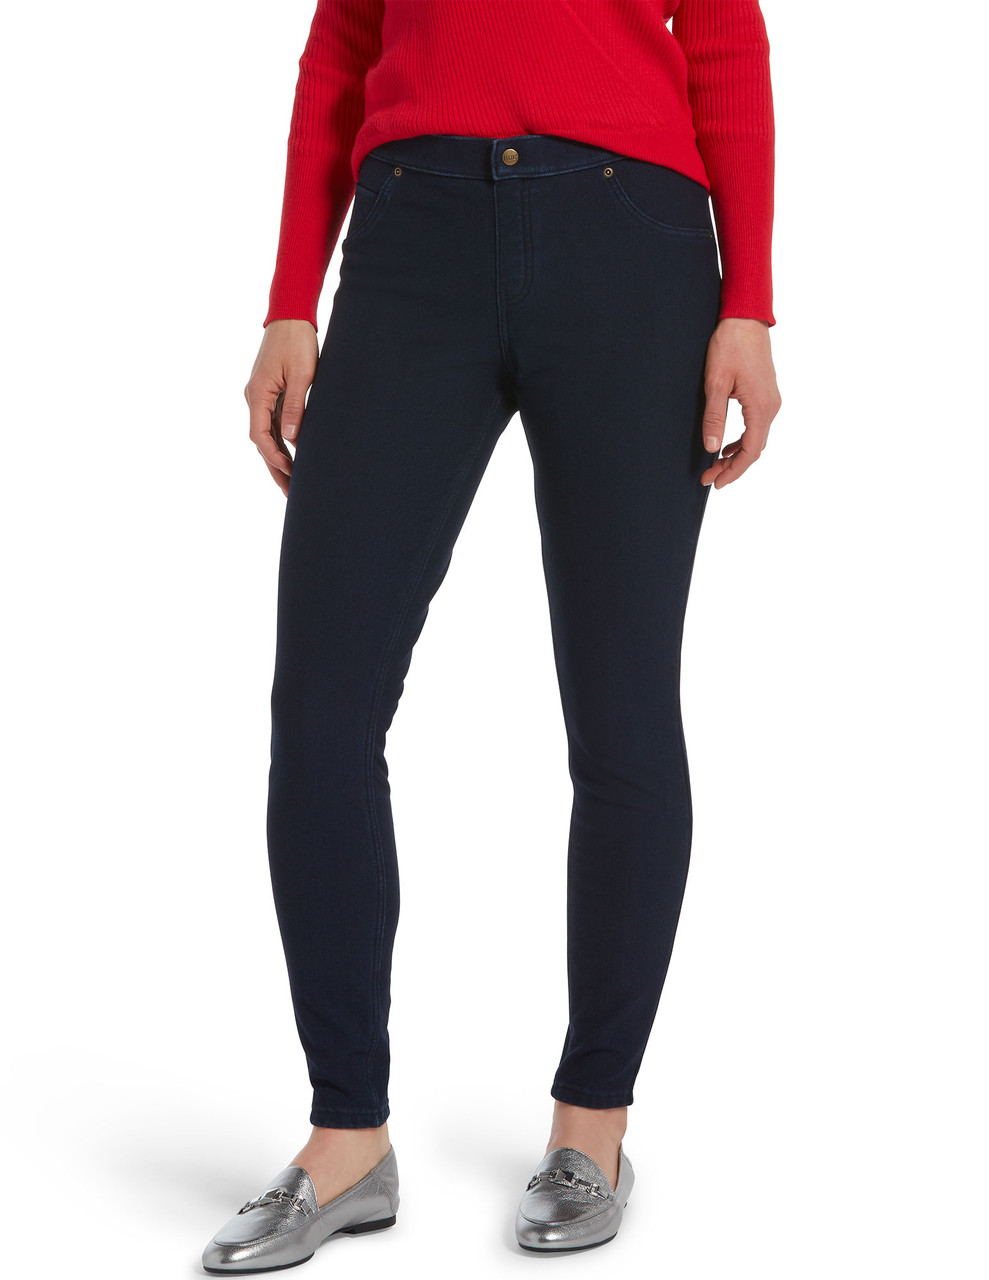 Conceited Fleece Lined Leggings Black Size 4 - $13 (48% Off Retail) - From  Anne